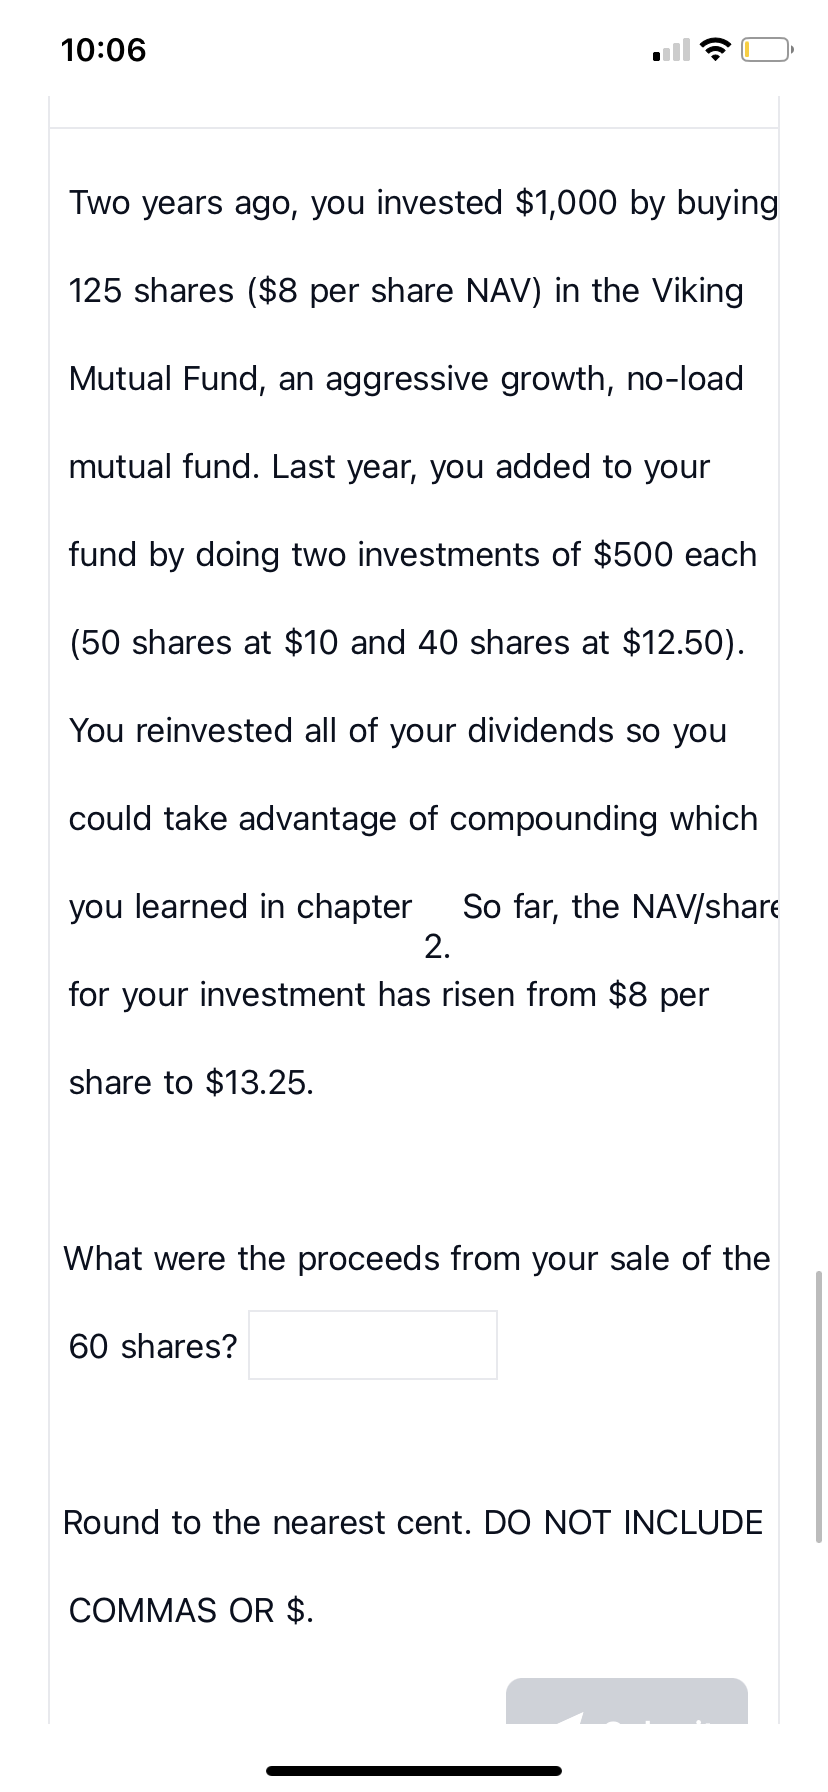 10:06
Two years ago, you invested $1,000 by buying
125 shares ($8 per share NAV) in the Viking
Mutual Fund, an aggressive growth, no-load
mutual fund. Last year, you added to your
fund by doing two investments of $500 each
(50 shares at $10 and 40 shares at $12.50).
You reinvested all of your dividends so you
could take advantage of compounding which
you learned in chapter So far, the NAV/share
2.
for your investment has risen from $8 per
share to $13.25.
What were the proceeds from your sale of the
60 shares?
Round to the nearest cent. DO NOT INCLUDE
COMMAS OR $.